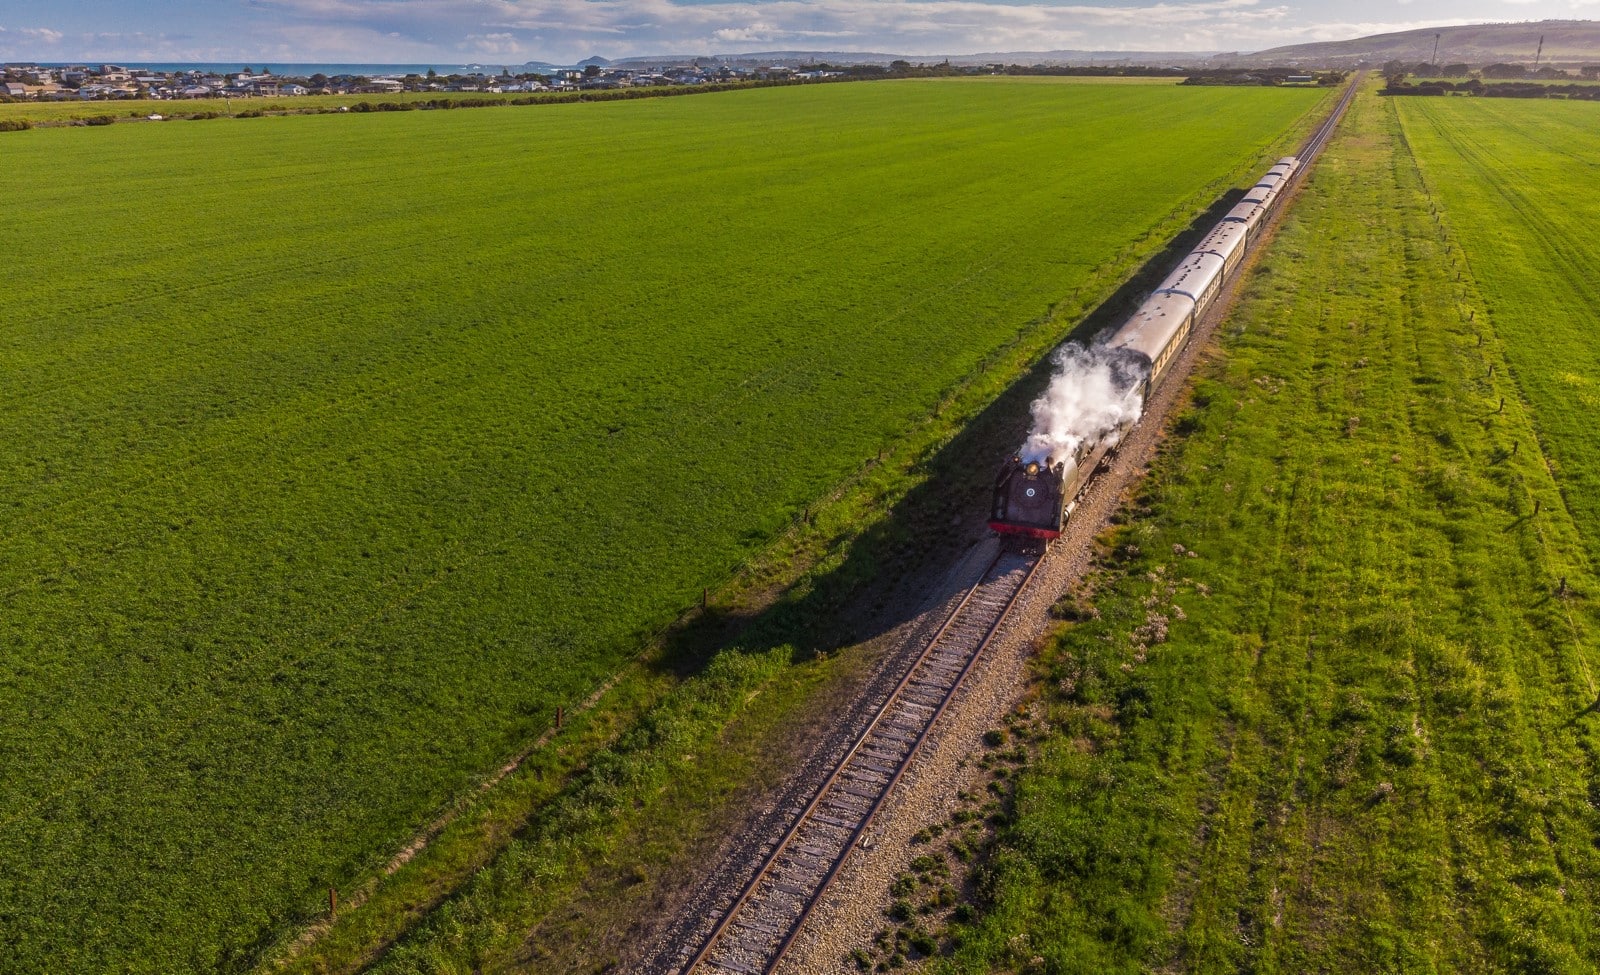 The Cockle Train from Goolwa